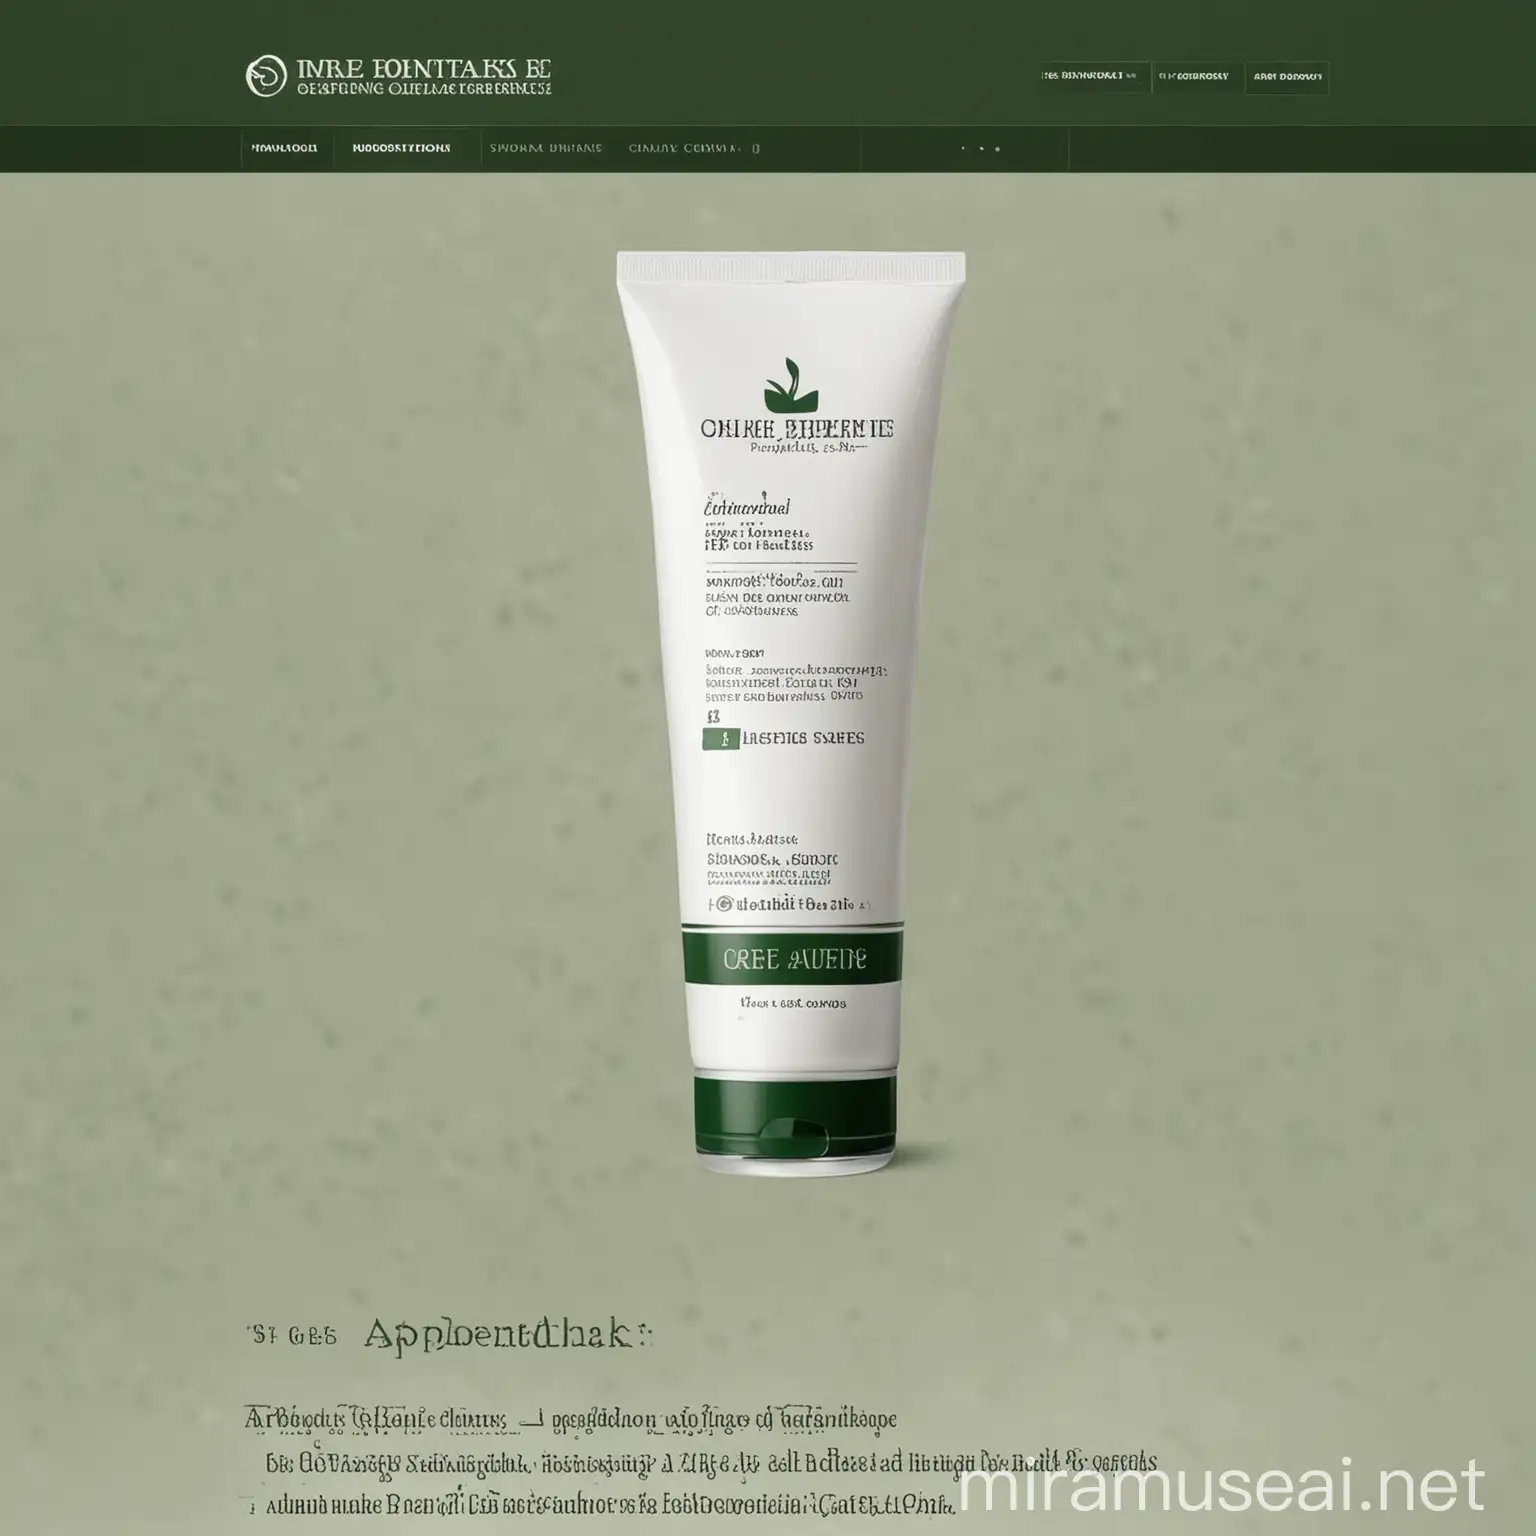 Product page of the website "Online-Apotheke.de", which sells the skincare cream "DermaTotal".